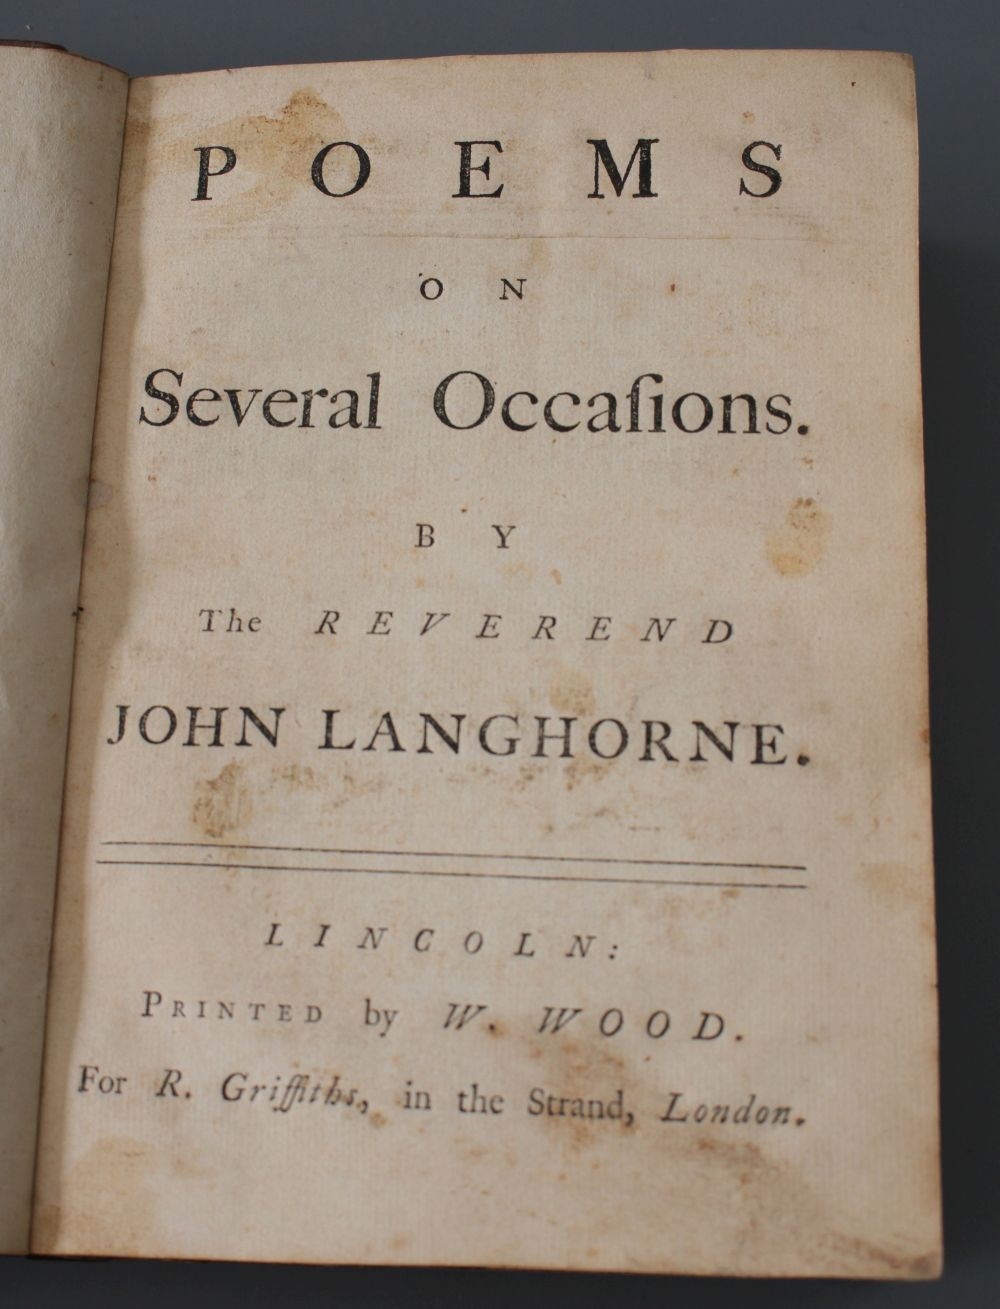 Langhorne, John - Poems on Several Occasions, small qto, quarter calf, lacking contents leaf, R. Griffiths, London [1760], Gay, John -